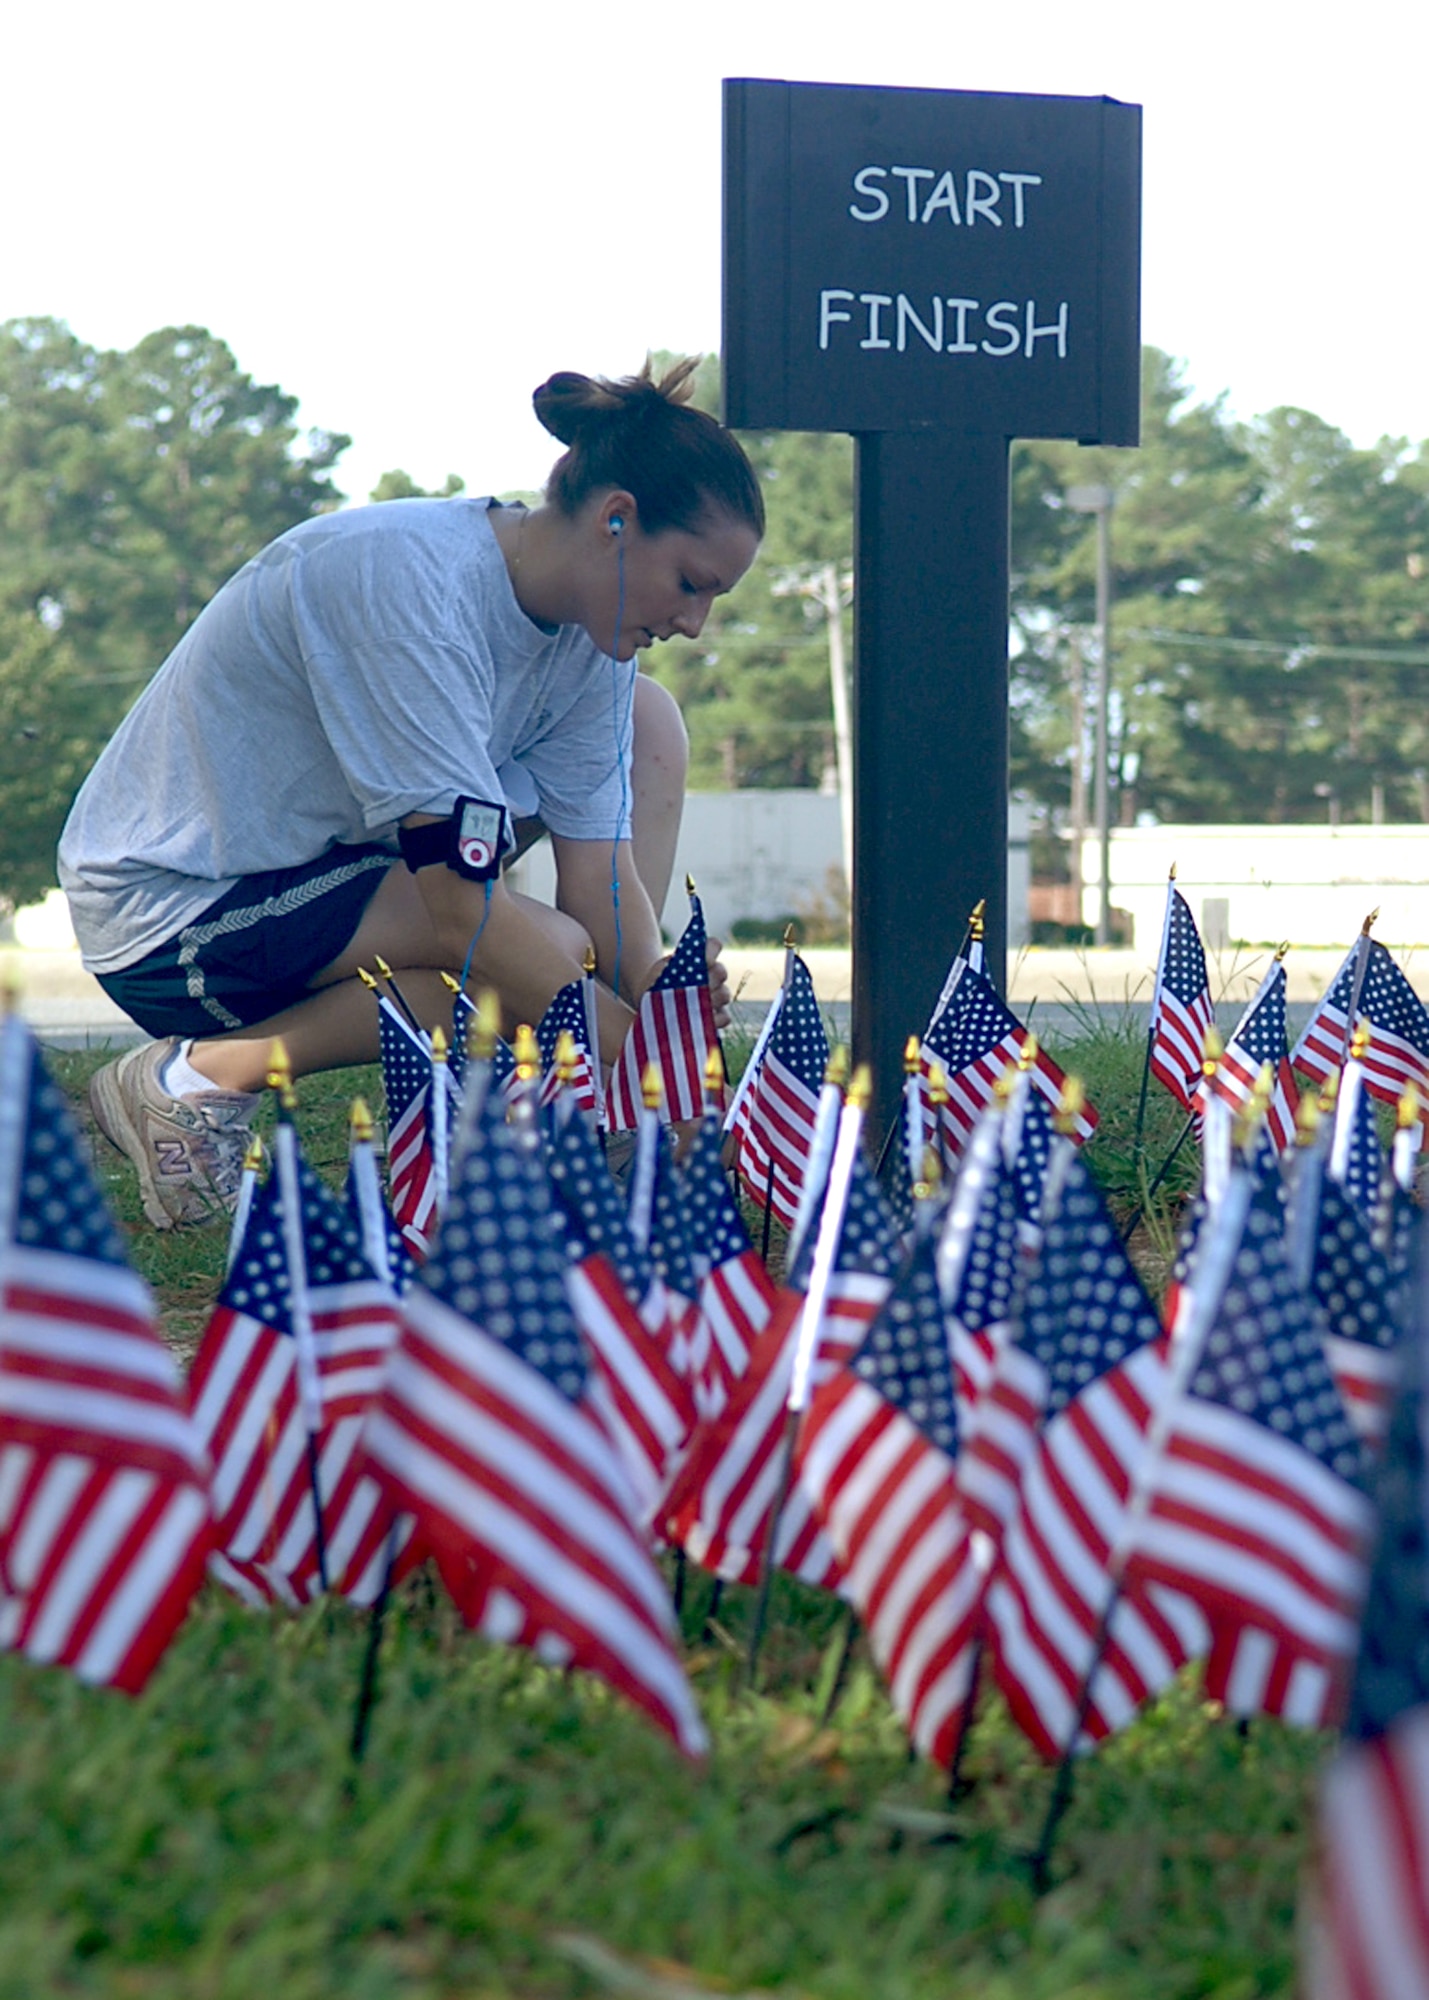 After running two miles as a participant in Run for the Fallen on Seymour Johnson Air Force Base, NC, an Airman places an American flag in the ground in remembrance of fallen military members of Operation Iraqi Freedom and Operation Enduring Freedom, August 24. (U.S. Air Force photo by Airman 1st Class Makenzie Lang)